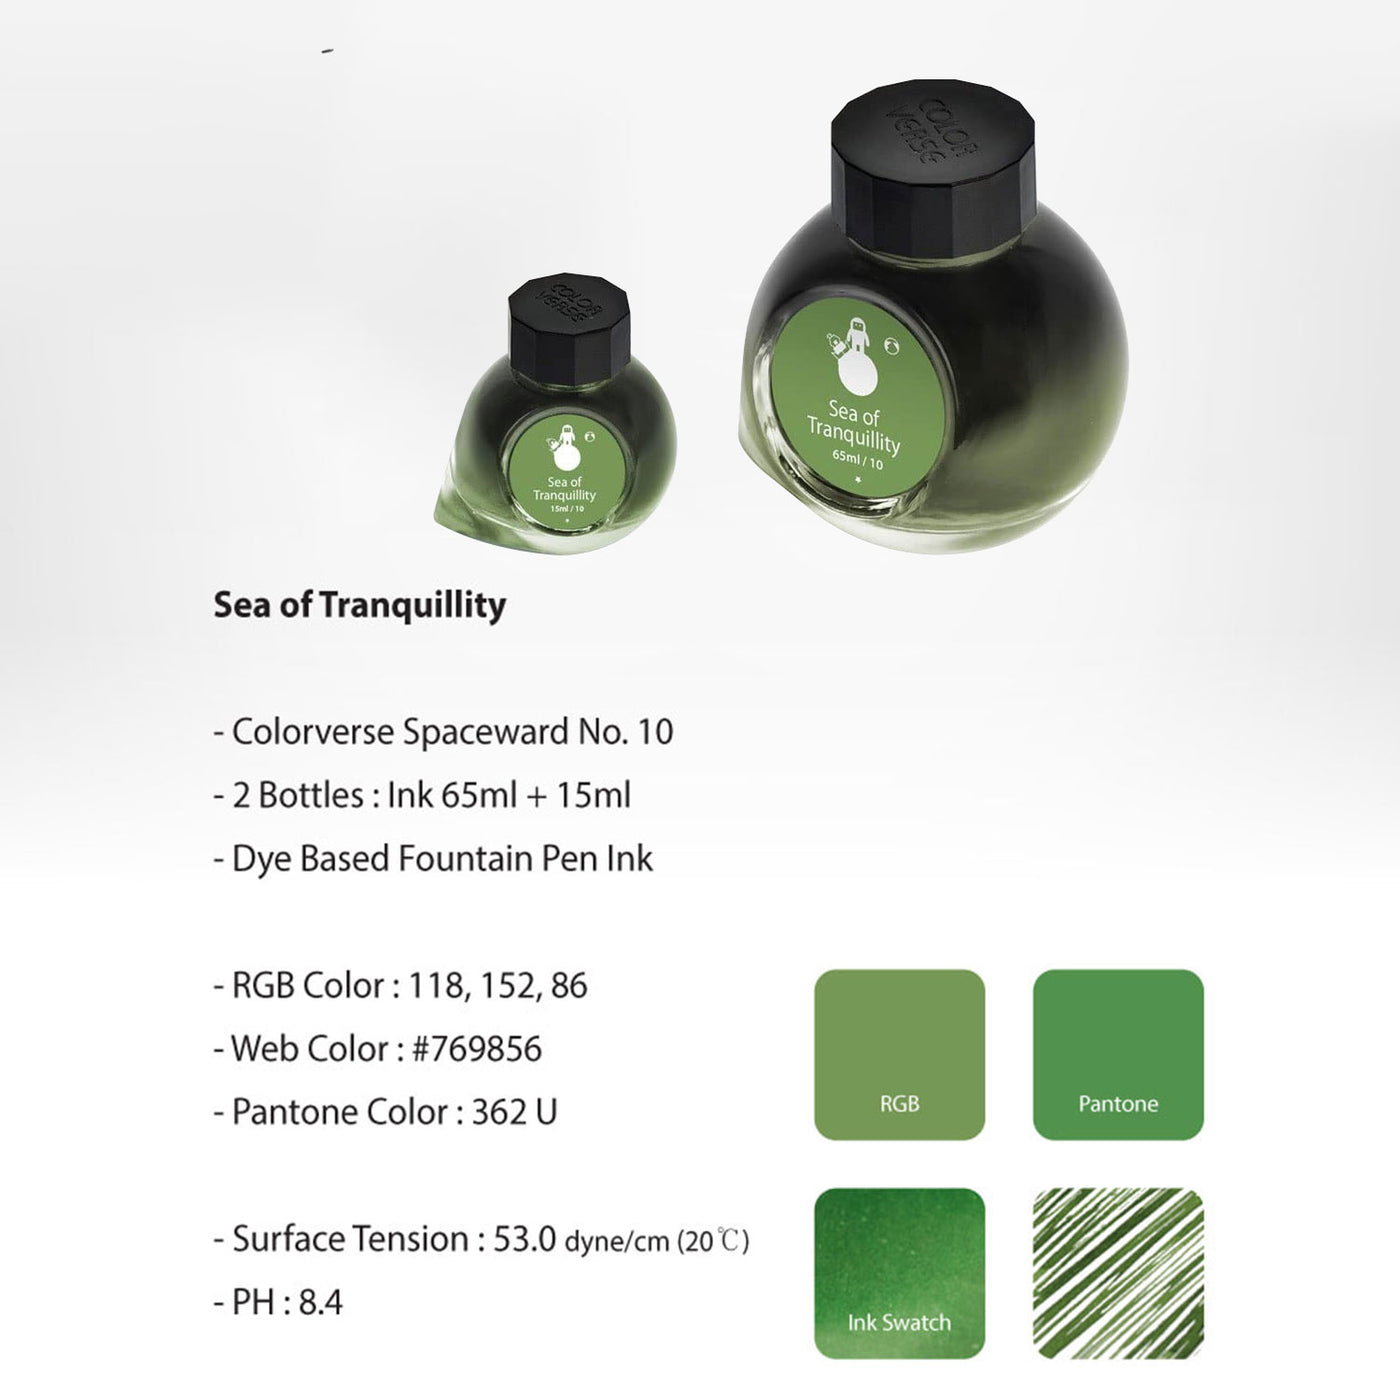 Colorverse Spaceward Sea of Tranquility Ink Bottle Green - 65ml + 15ml 2